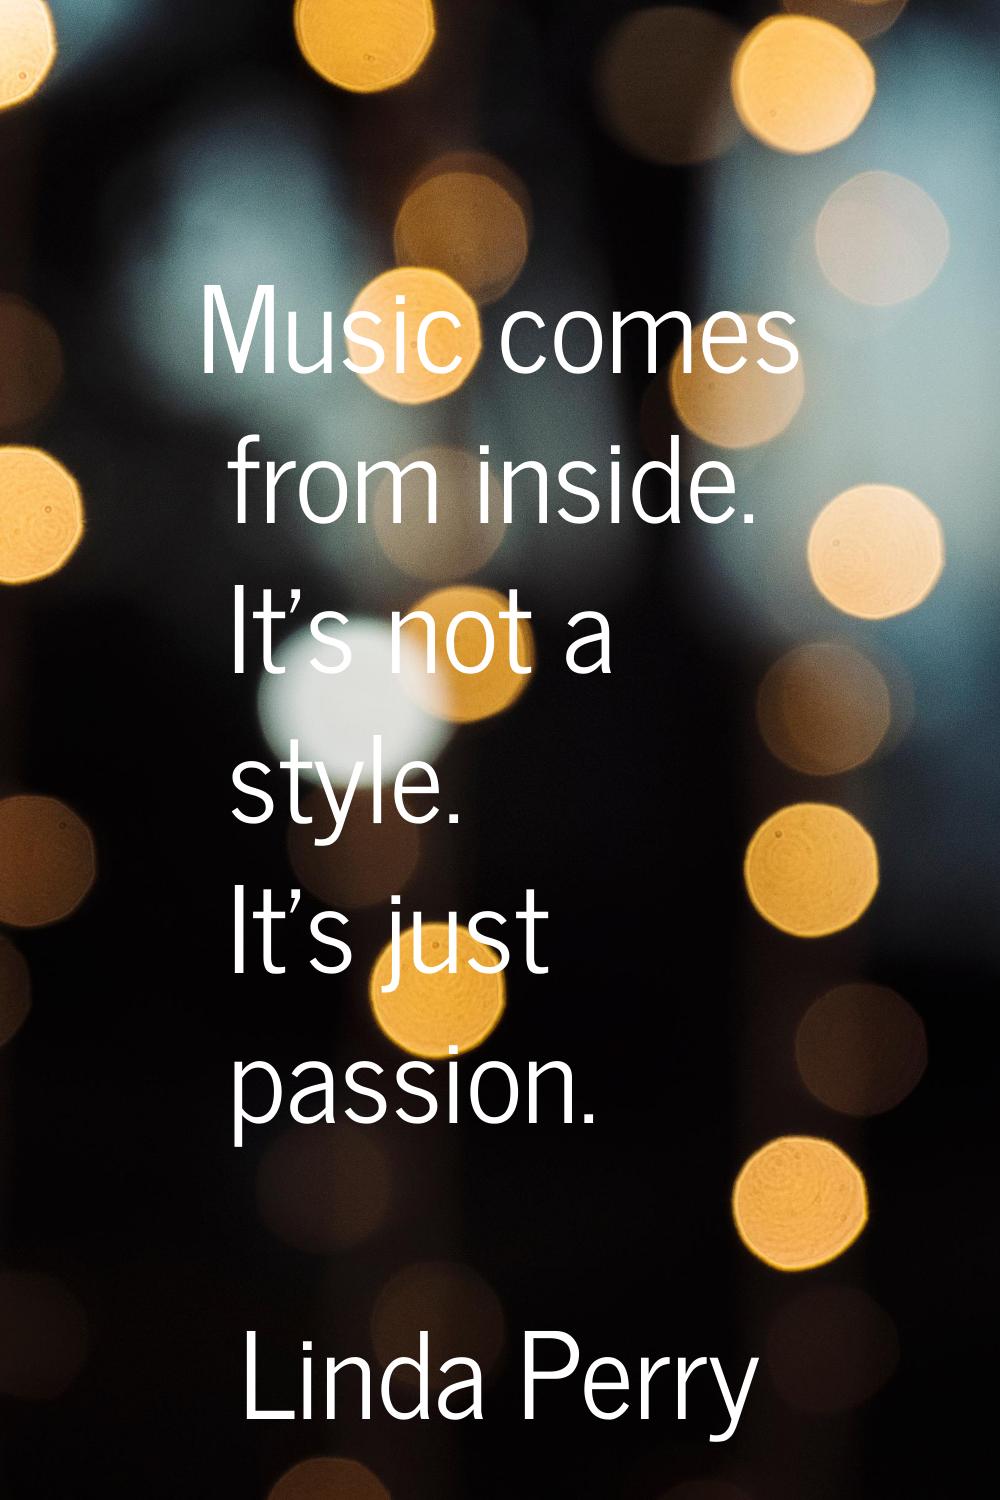 Music comes from inside. It's not a style. It's just passion.